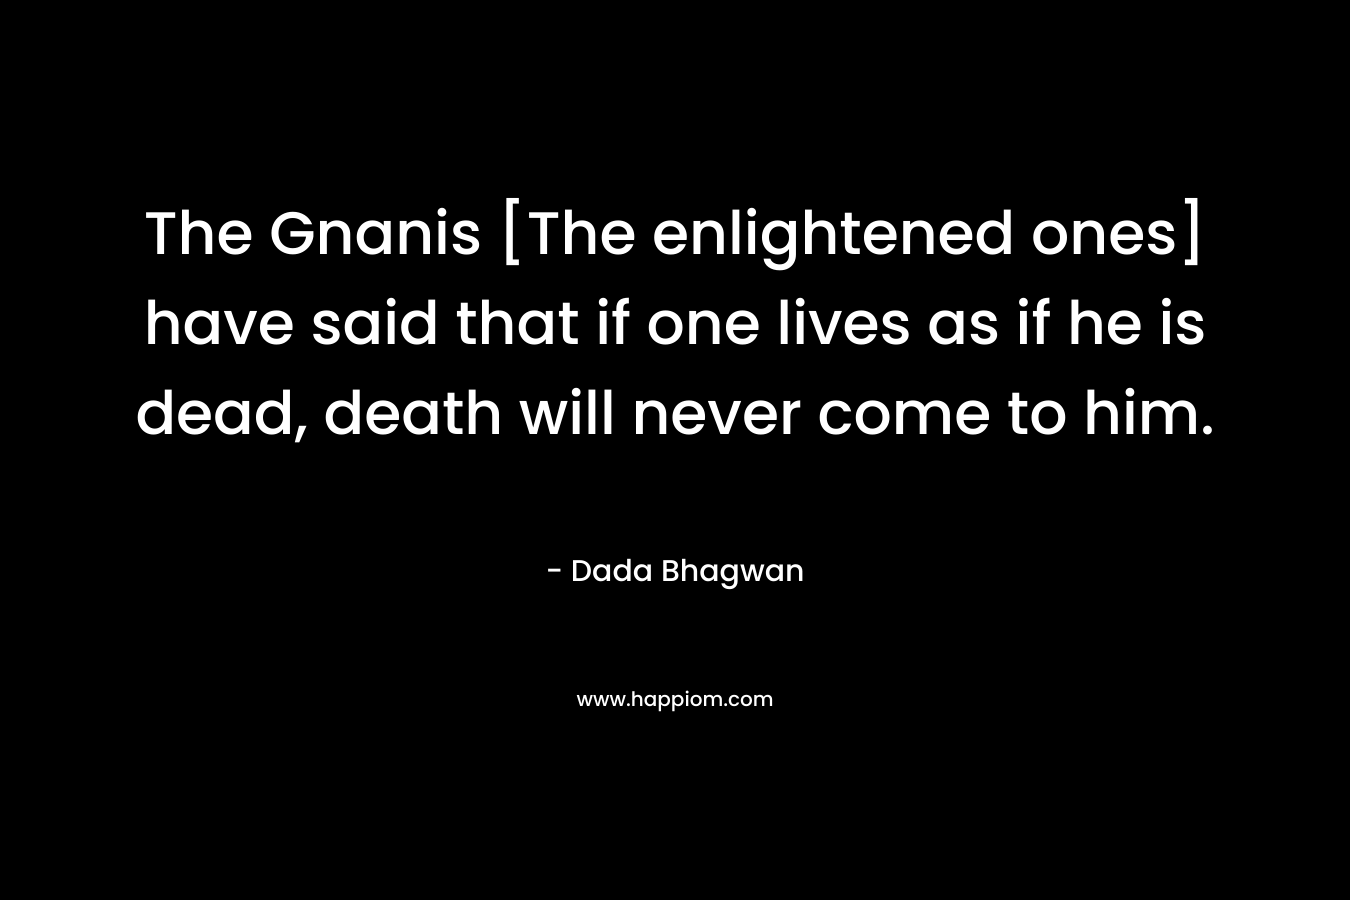 The Gnanis [The enlightened ones] have said that if one lives as if he is dead, death will never come to him.